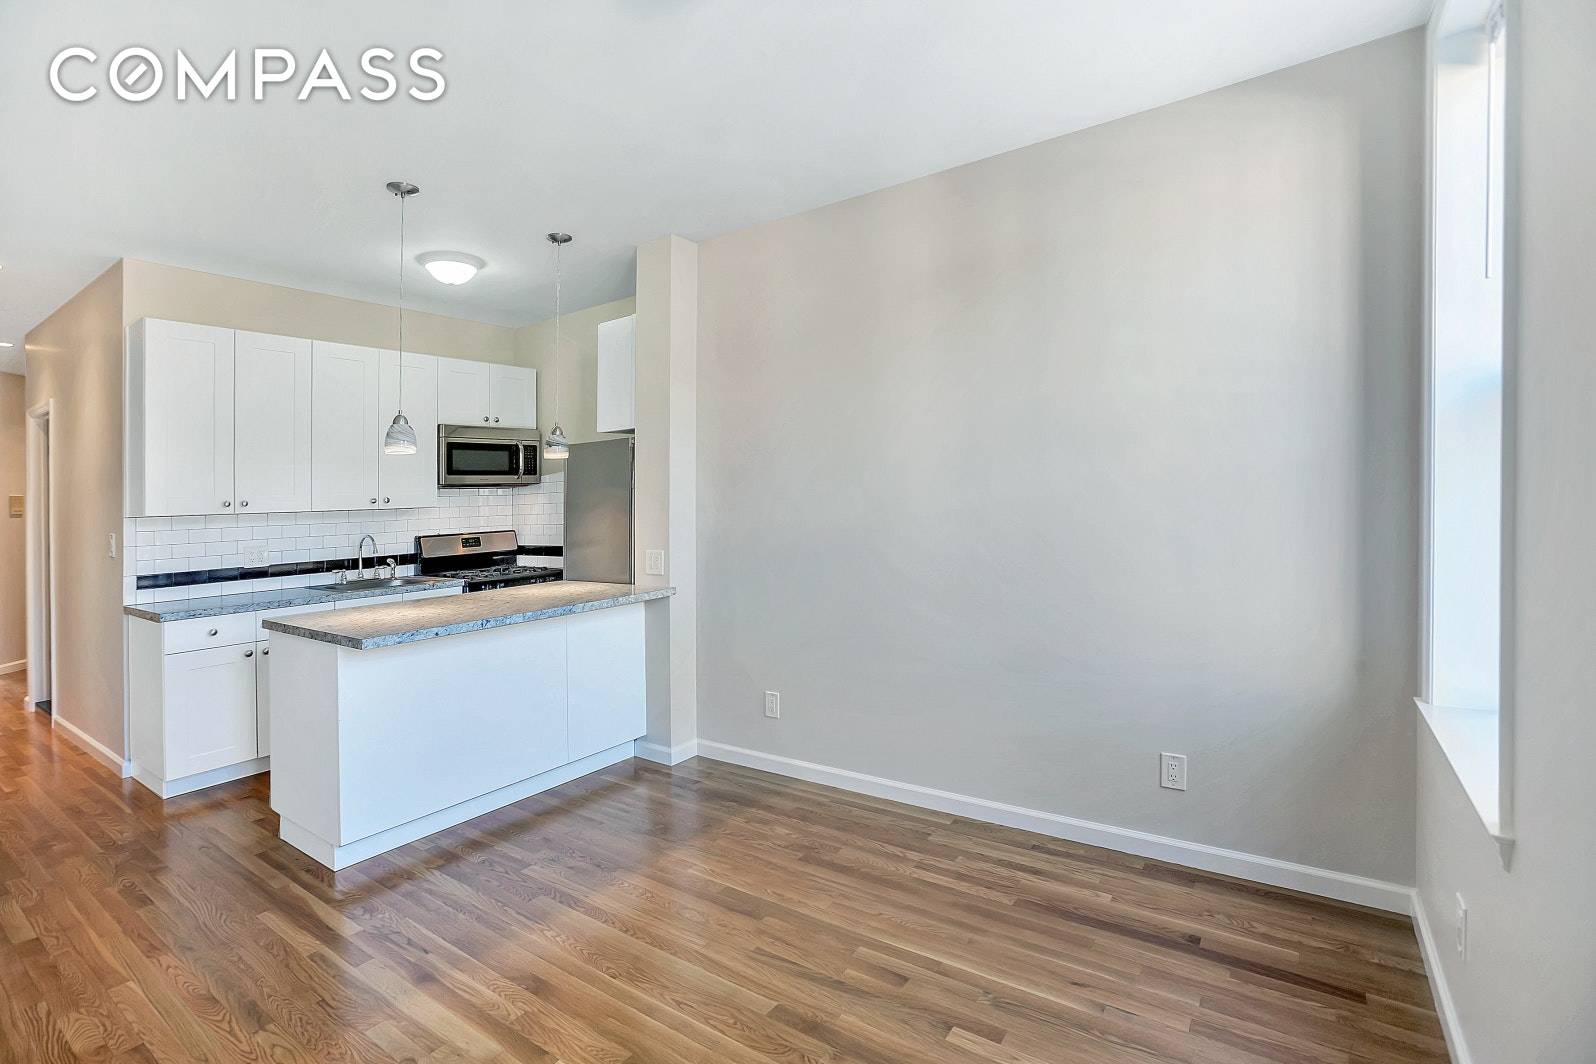 Back on the market ! This newly gut renovated 1BR features an open kitchen layout with brand new stainless steel appliances and spacious high ceilings throughout.